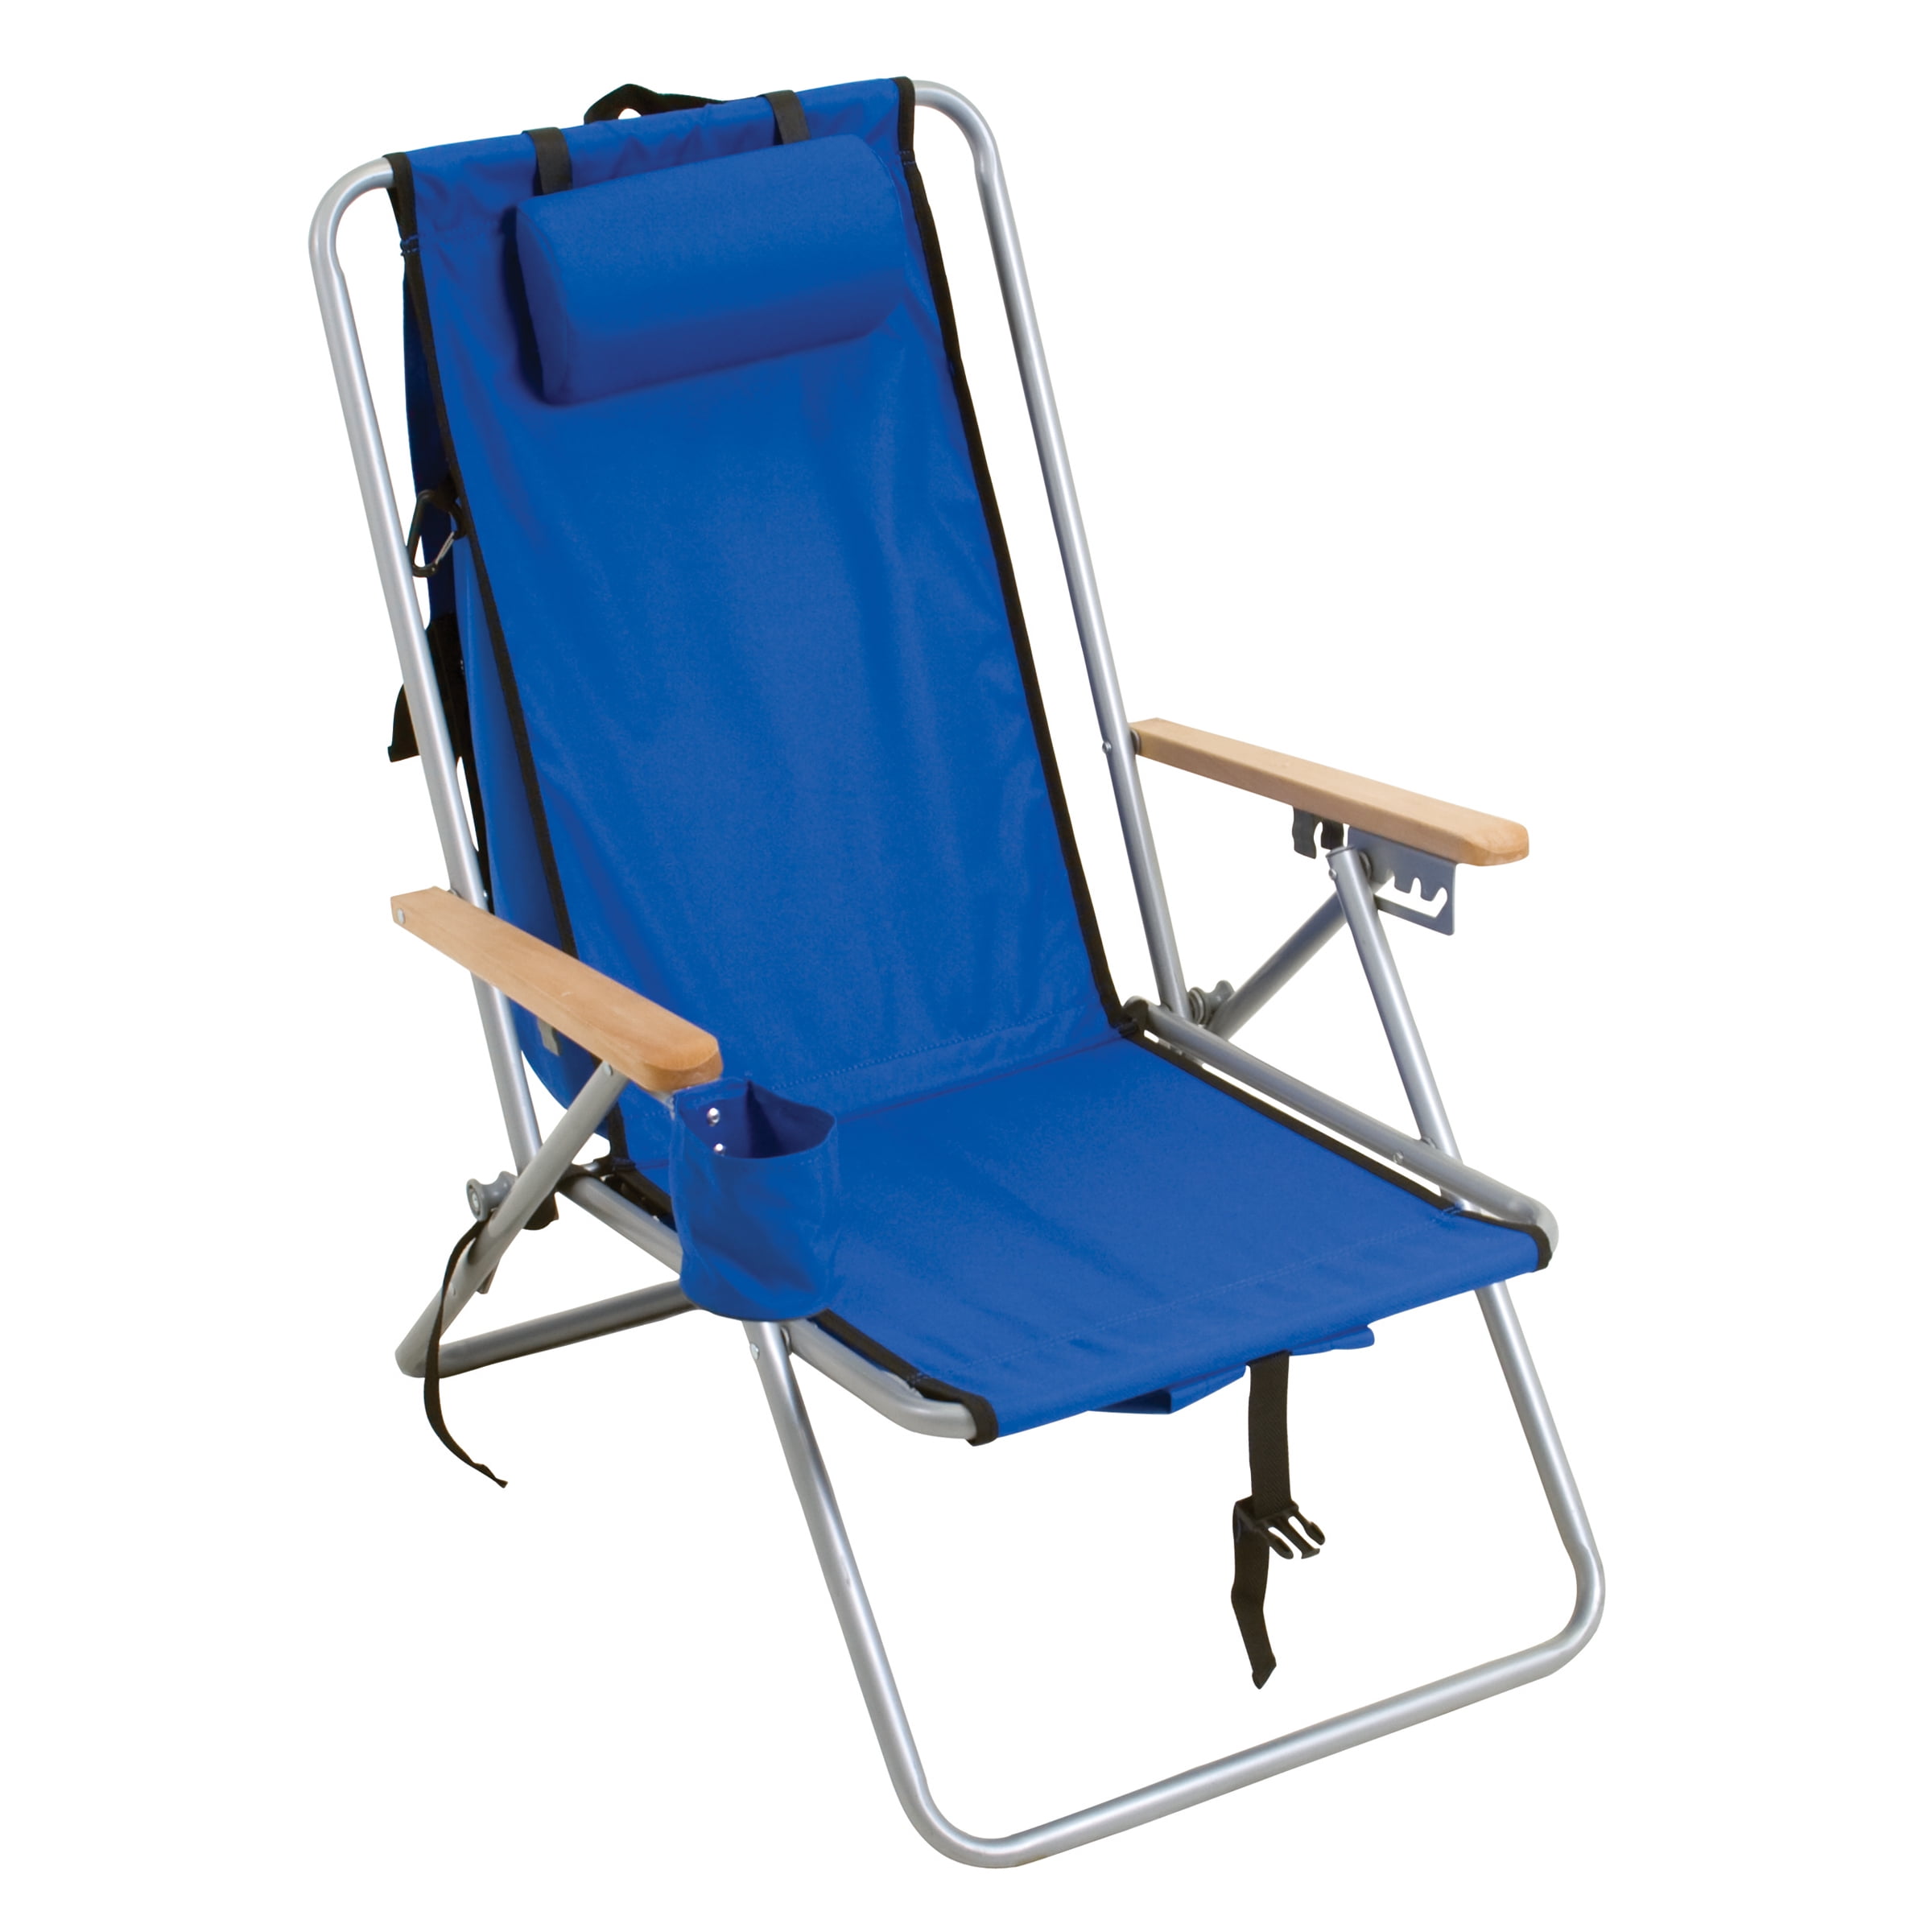 Minimalist High Beach Lounge Chair for Small Space